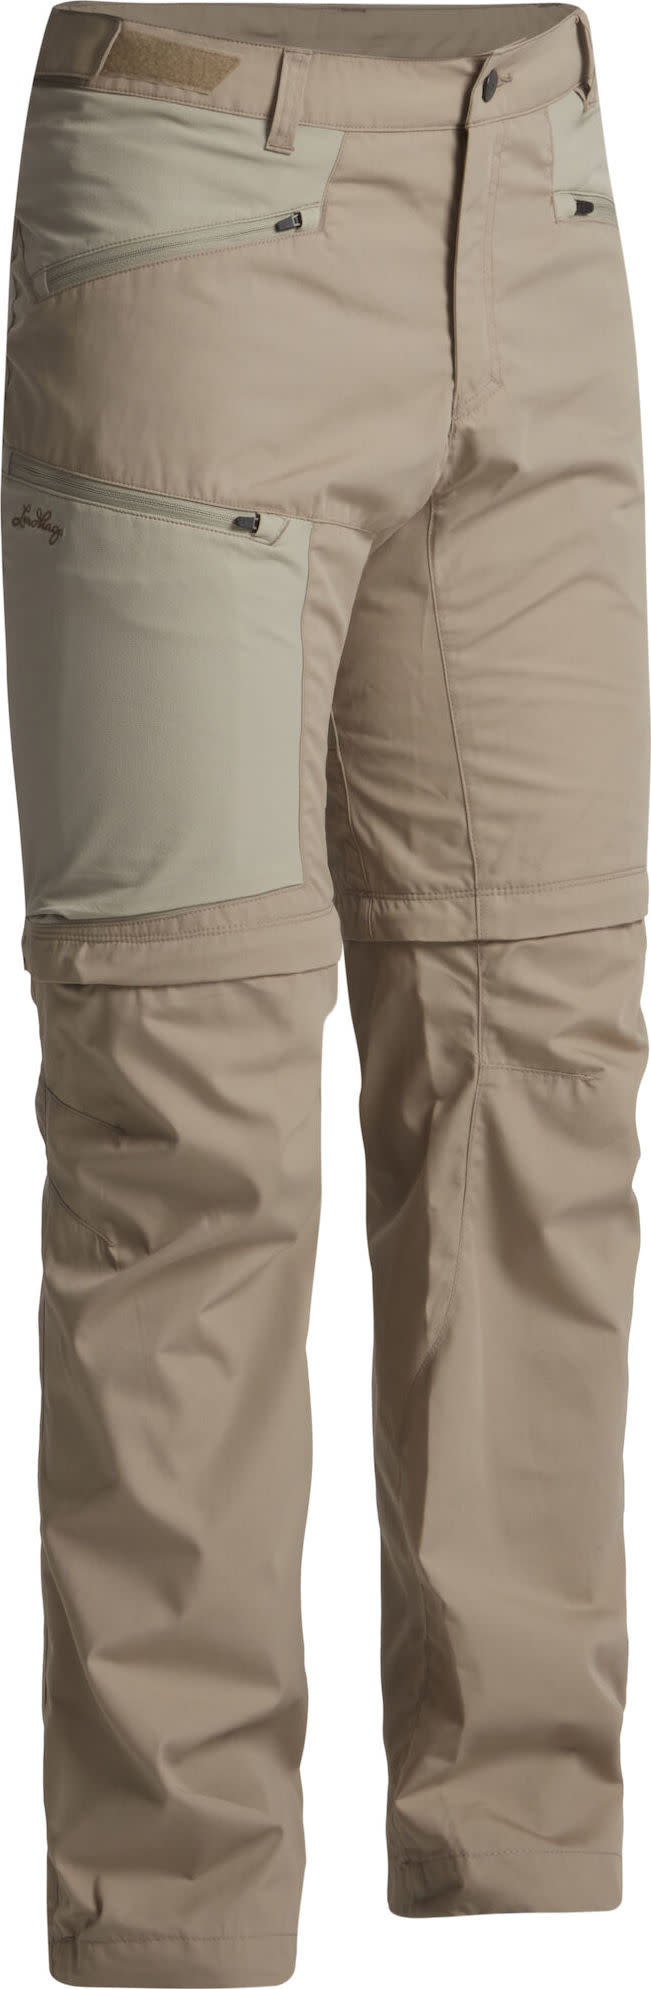 Men's Tived Zip-Off Pant  Sand Lundhags